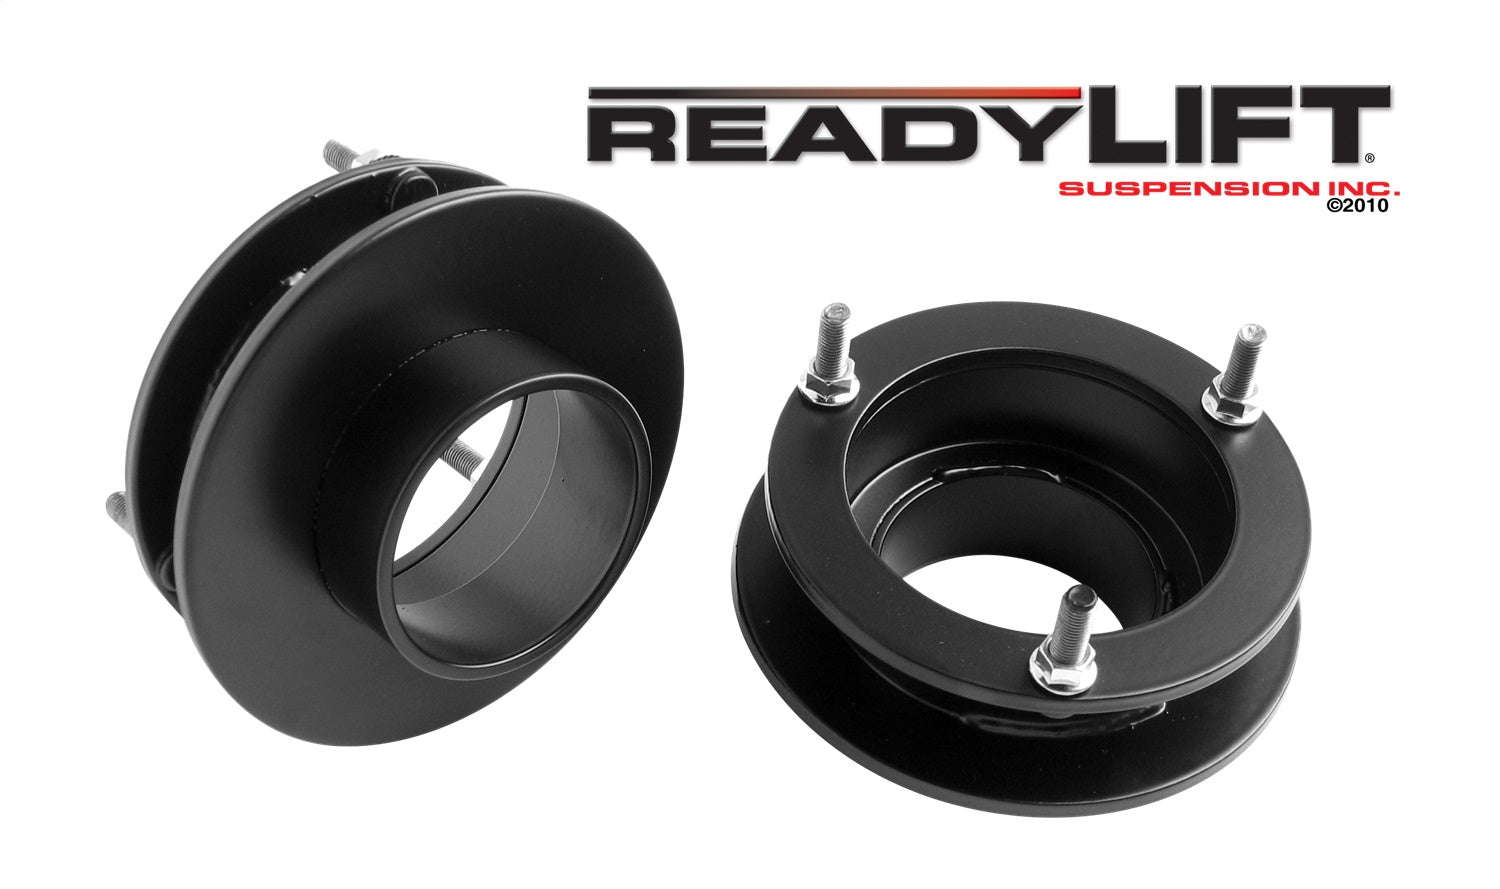 Readylift 66-1090 Coil Spacer, Black, for tires up to 35"